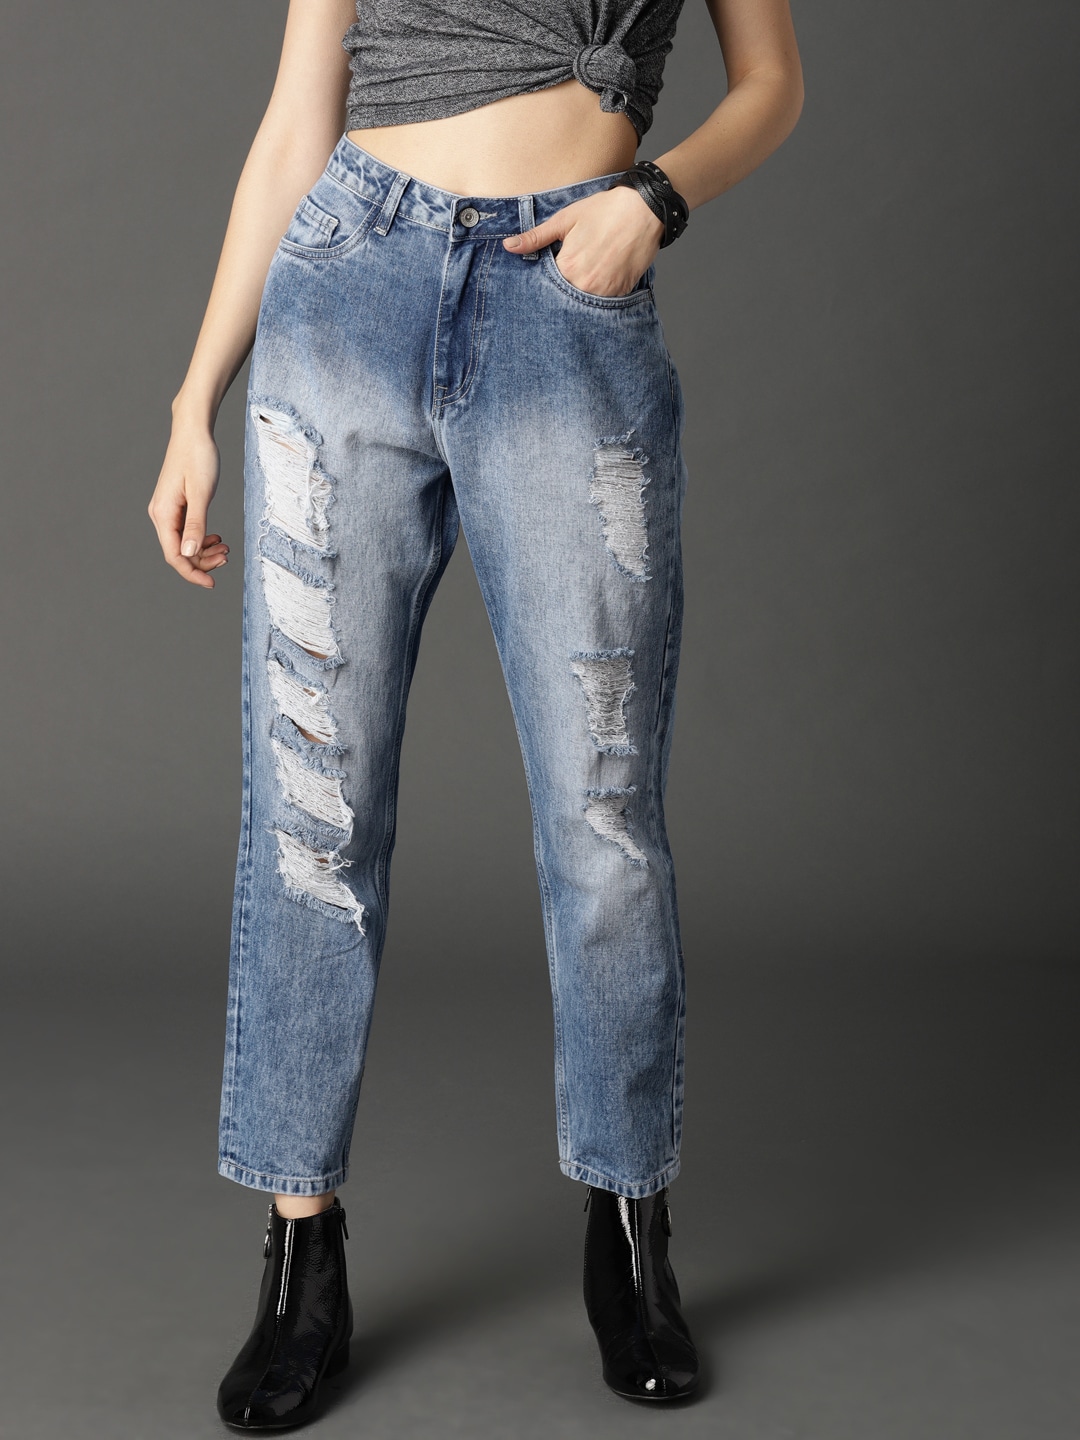 Latest Roadster Baggy & Wide-Leg Jeans arrivals - Women - 25 products |  FASHIOLA INDIA